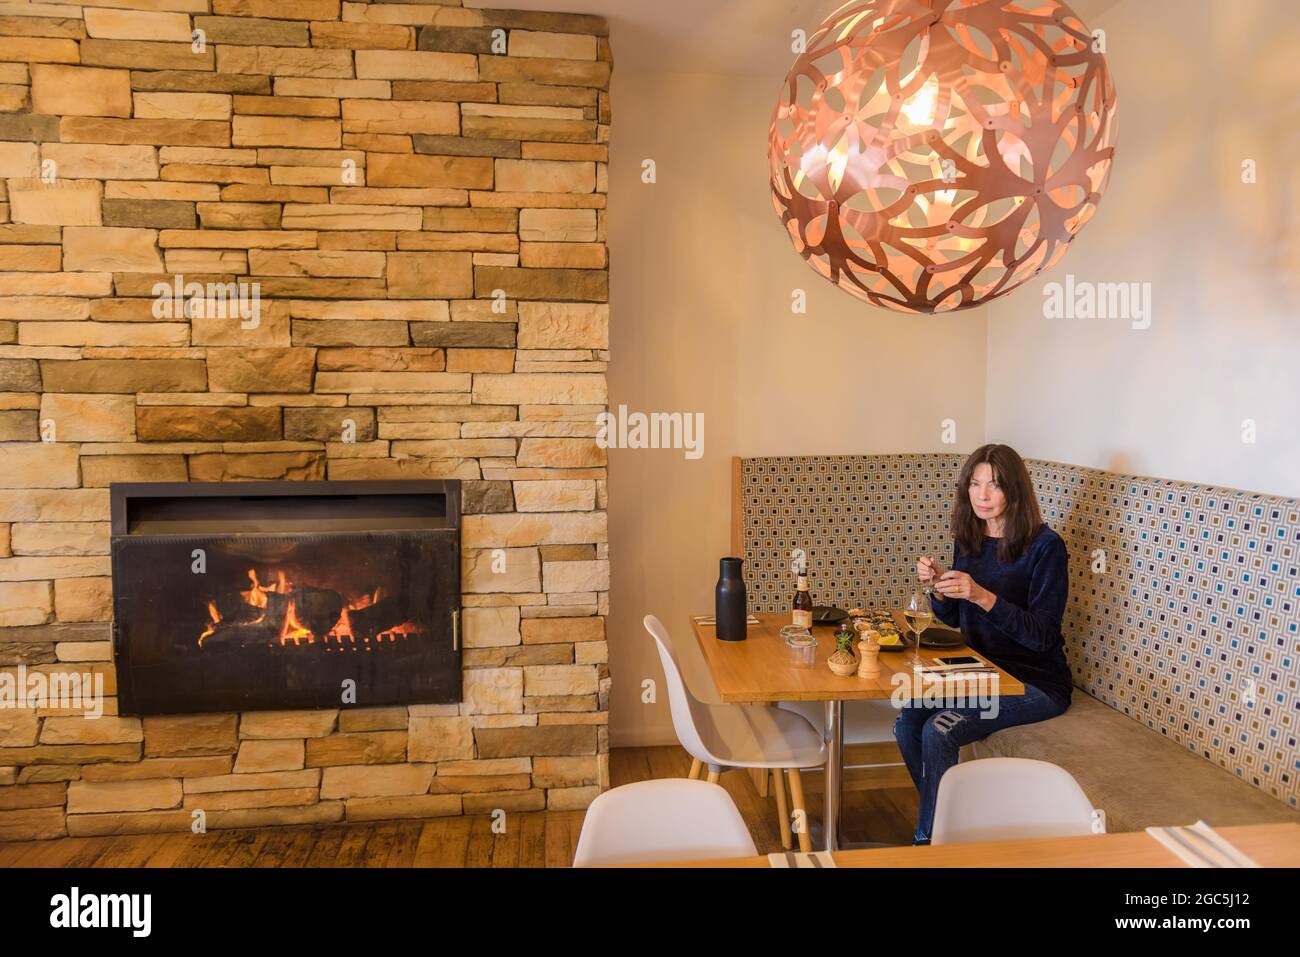 A female tourist sits in an alcove near a burning fireplace enjoying lunch at the 1802 restaurant at Coffin Bay, Eyre Peninsula in South Australia. Stock Photo